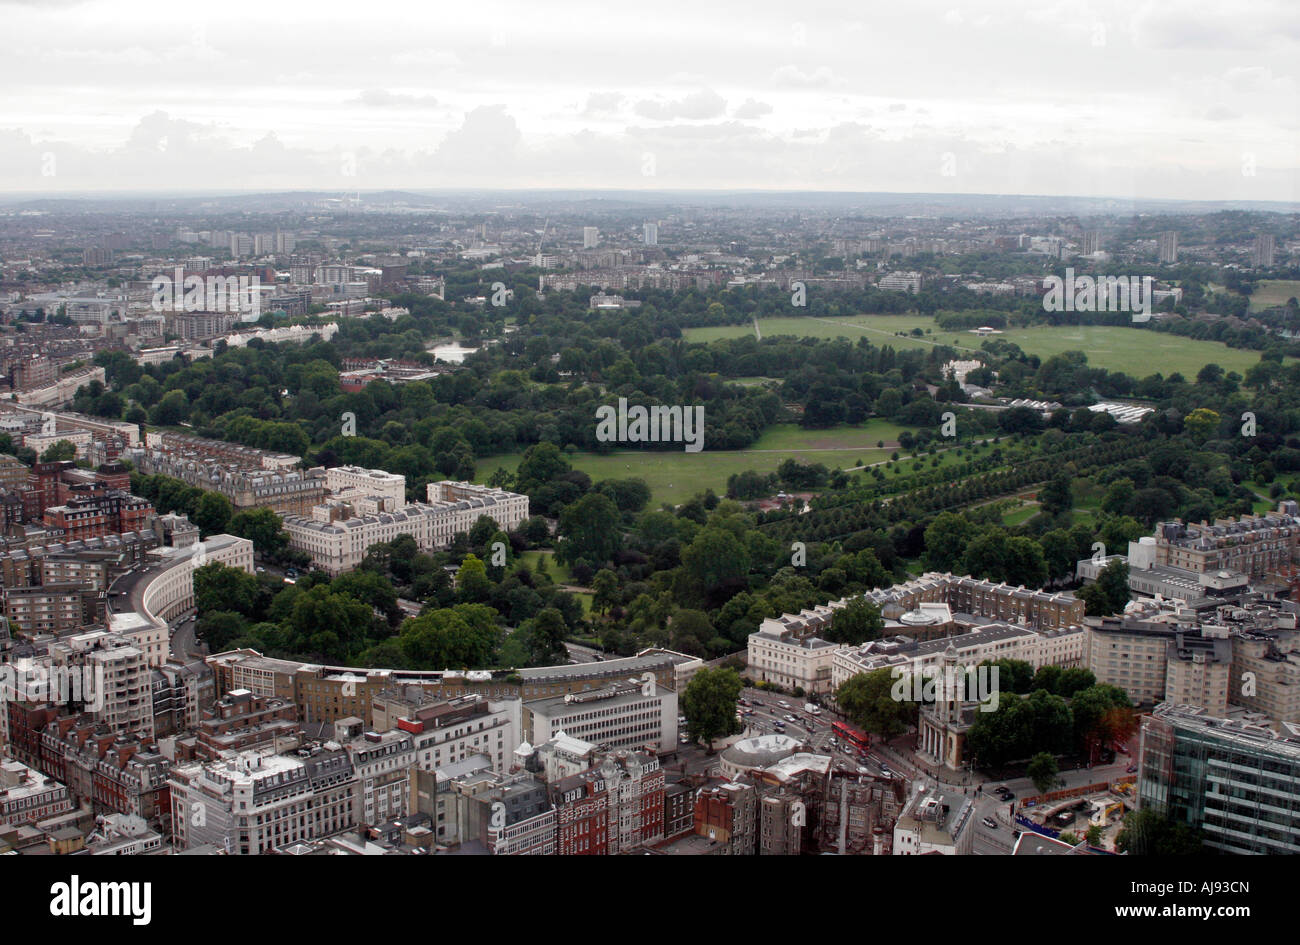 The view from the top of the BT Telecom Tower across Regents Park towards Wembley and North West London Stock Photo